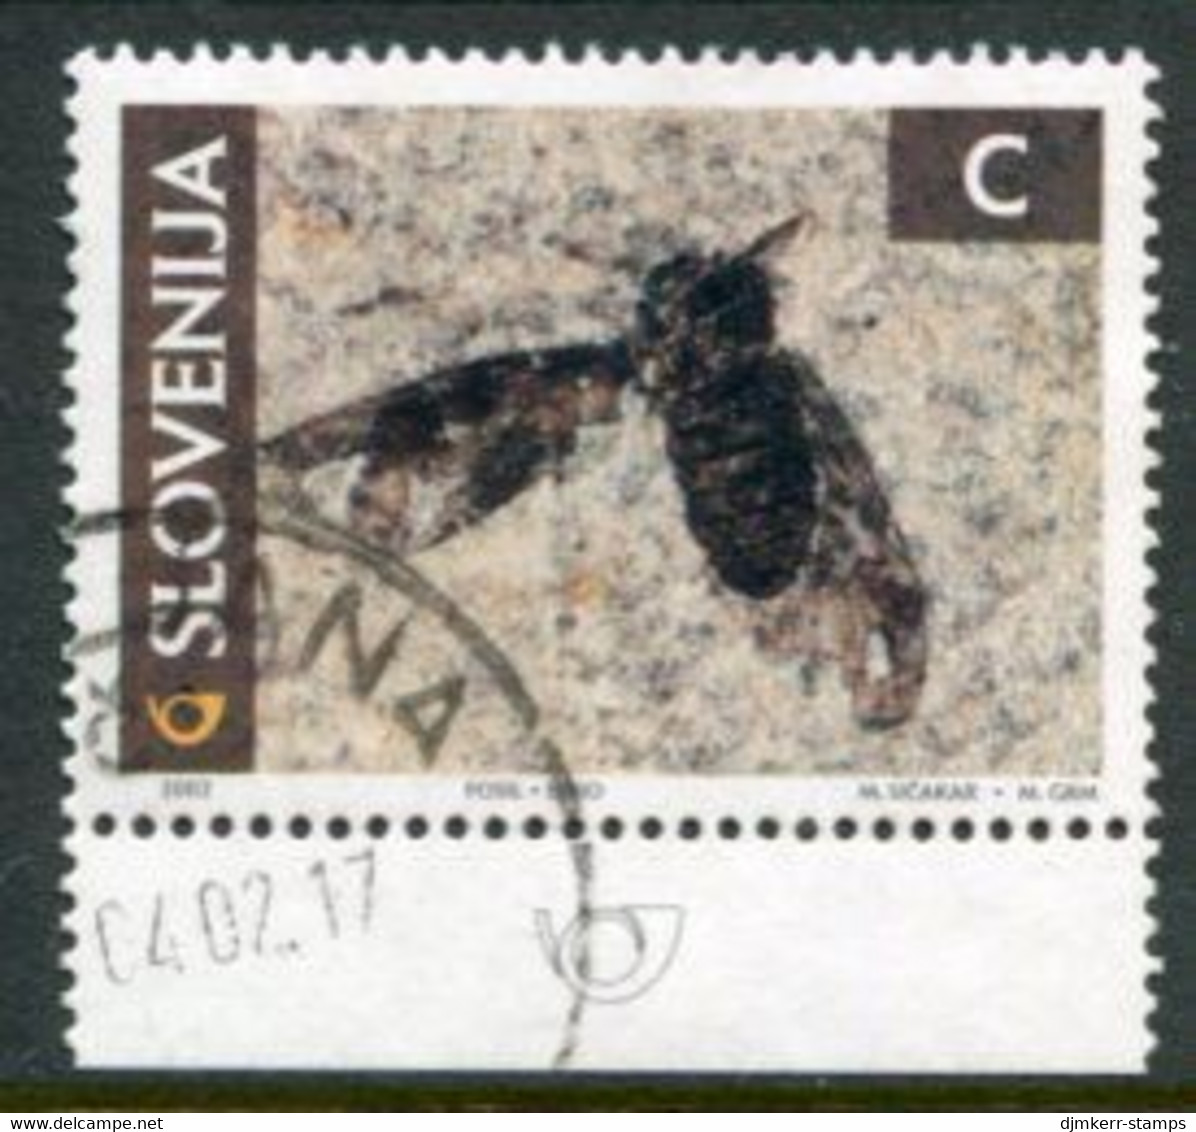 SLOVENIA 2002 Insect Fossil Used  Michel 394 - Slovénie